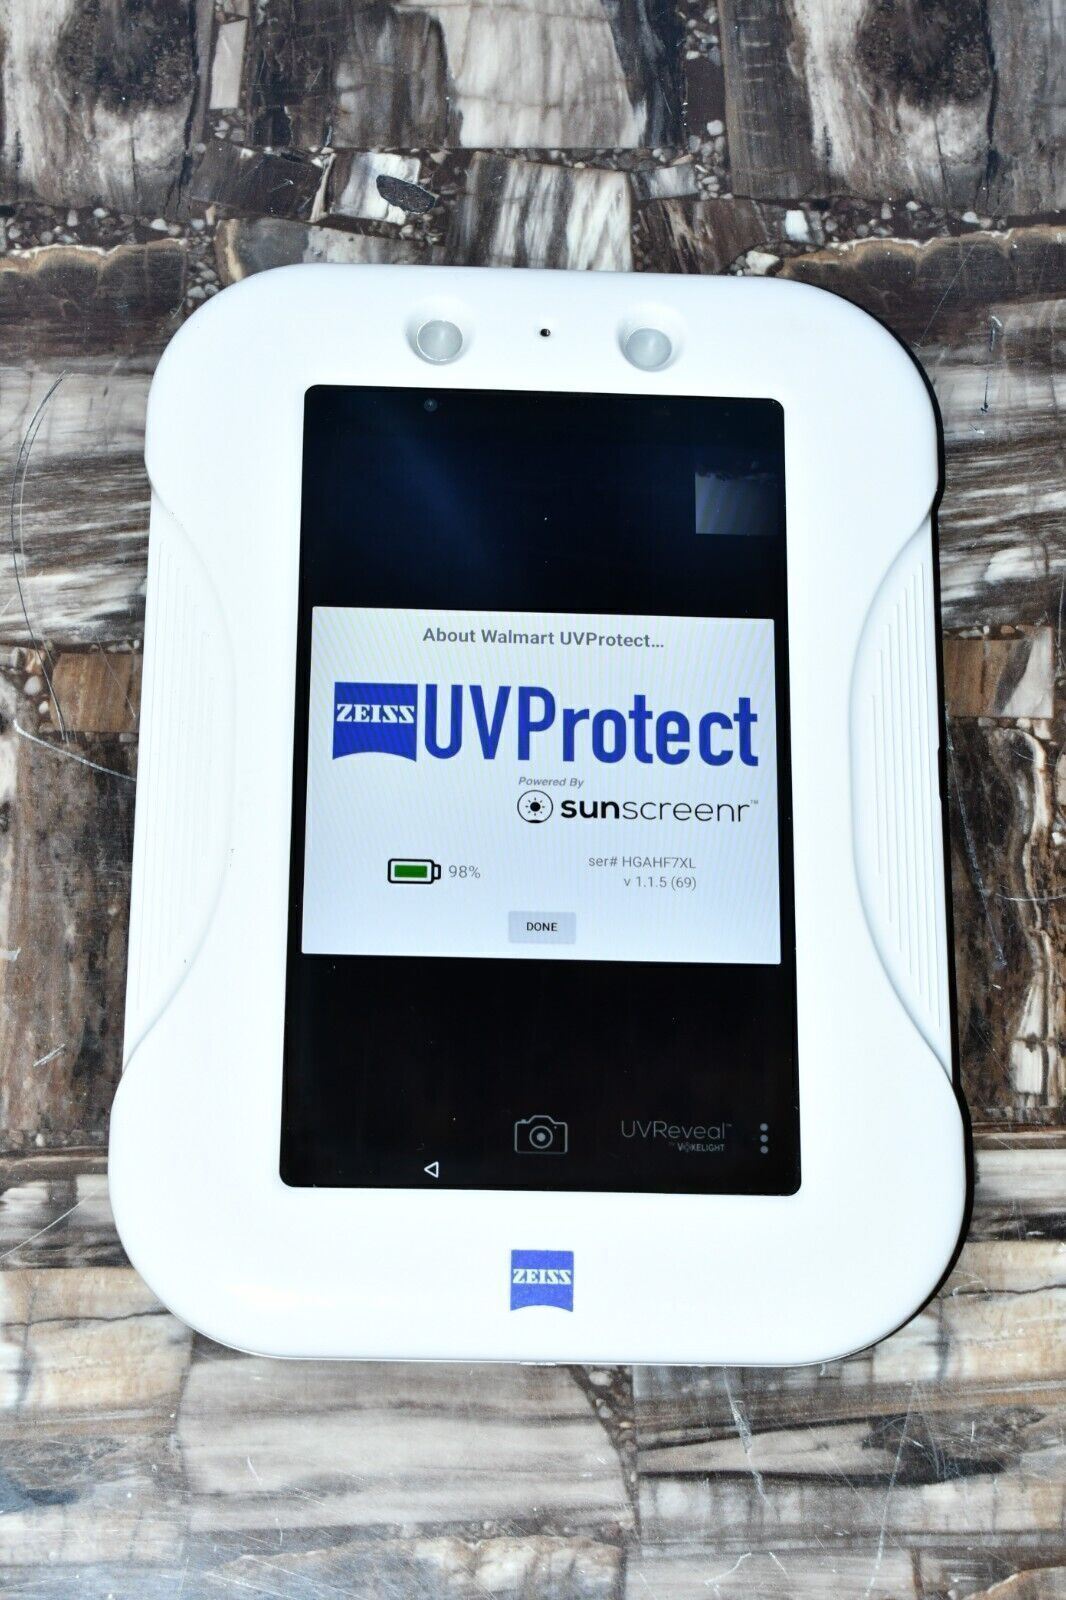 ZEISS C-UVPROTECT UV protect Glasses tester